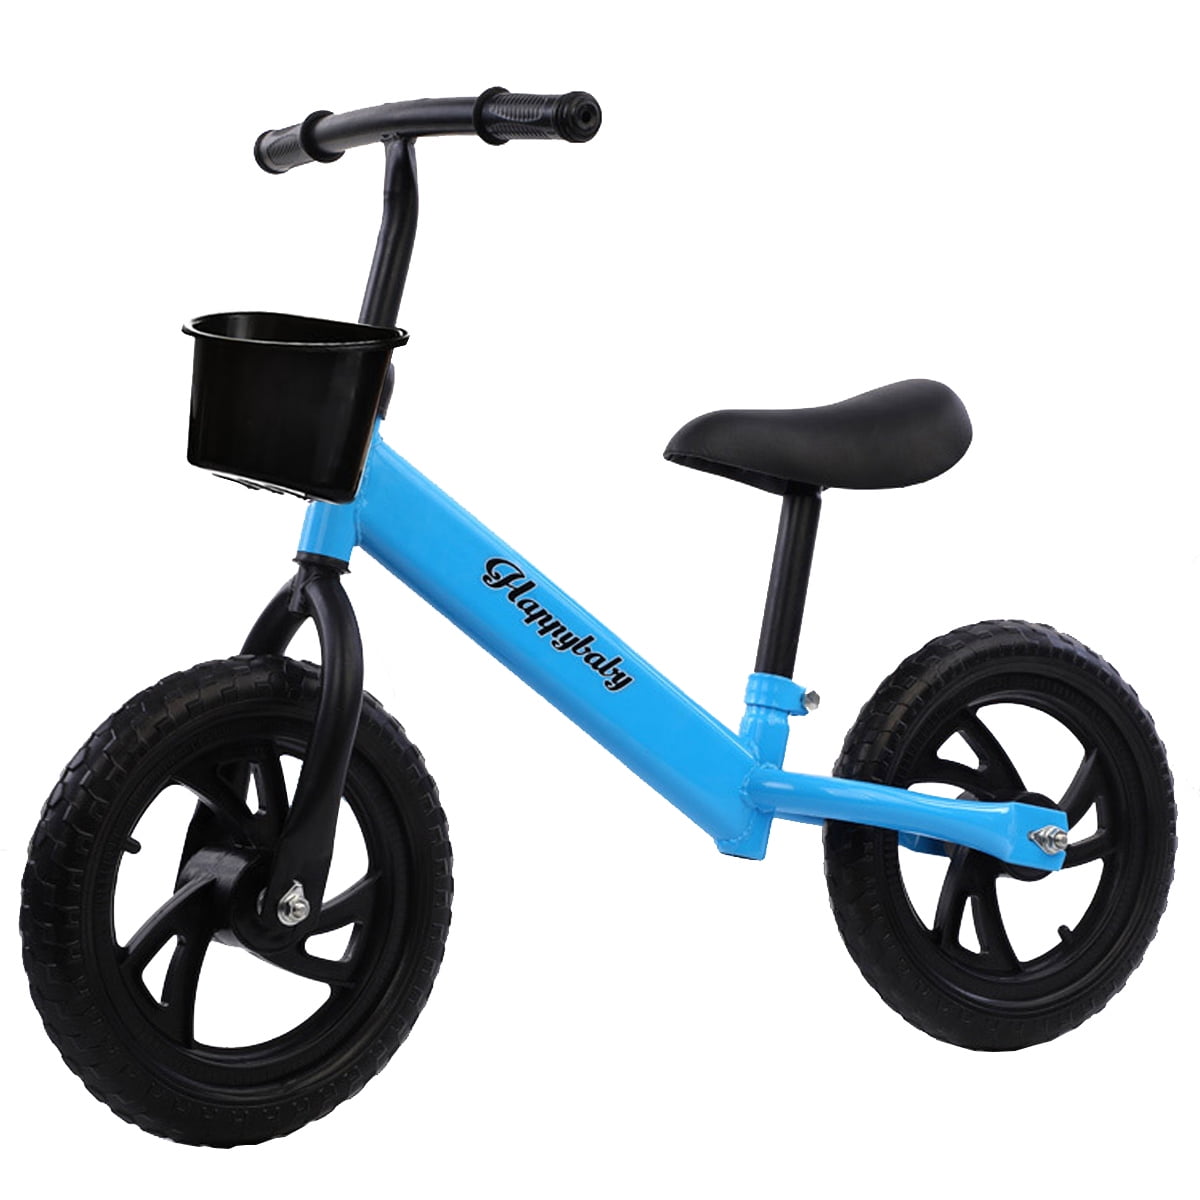 Details about   12" Kid Balance Bike Walker No Pedal Childs Training Bicycle Toy Adjustable Seat 